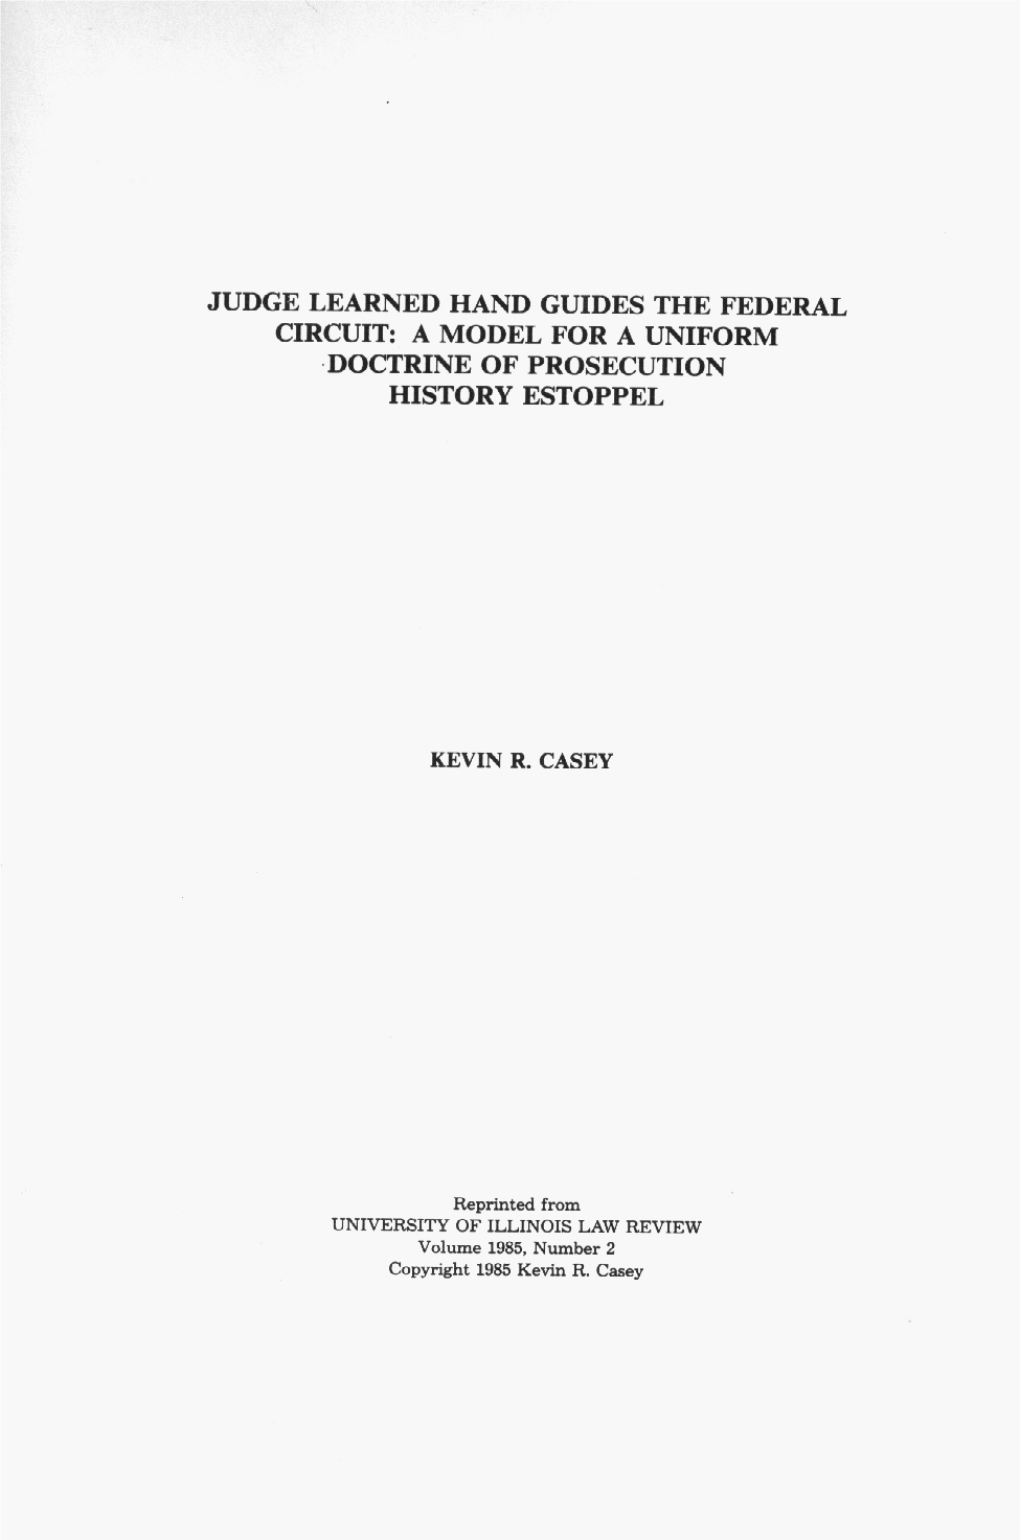 Judge Learned Hand Guides the Federal Circuit: a Model for a Uniform Doctrine of Prosecution History Estoppel